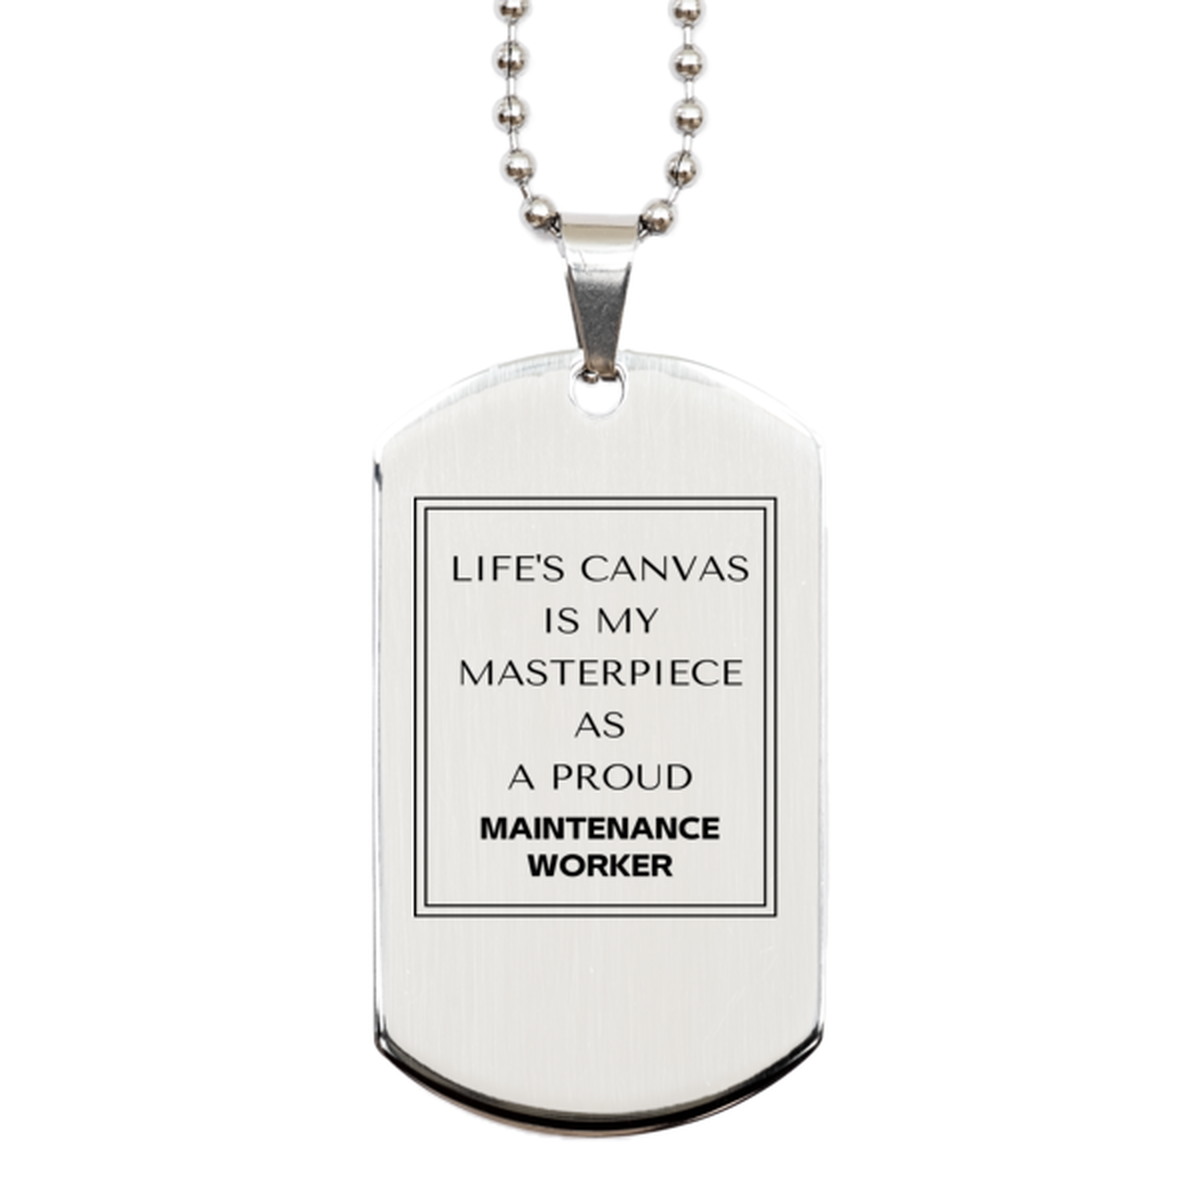 Proud Maintenance Worker Gifts, Life's canvas is my masterpiece, Epic Birthday Christmas Unique Silver Dog Tag For Maintenance Worker, Coworkers, Men, Women, Friends